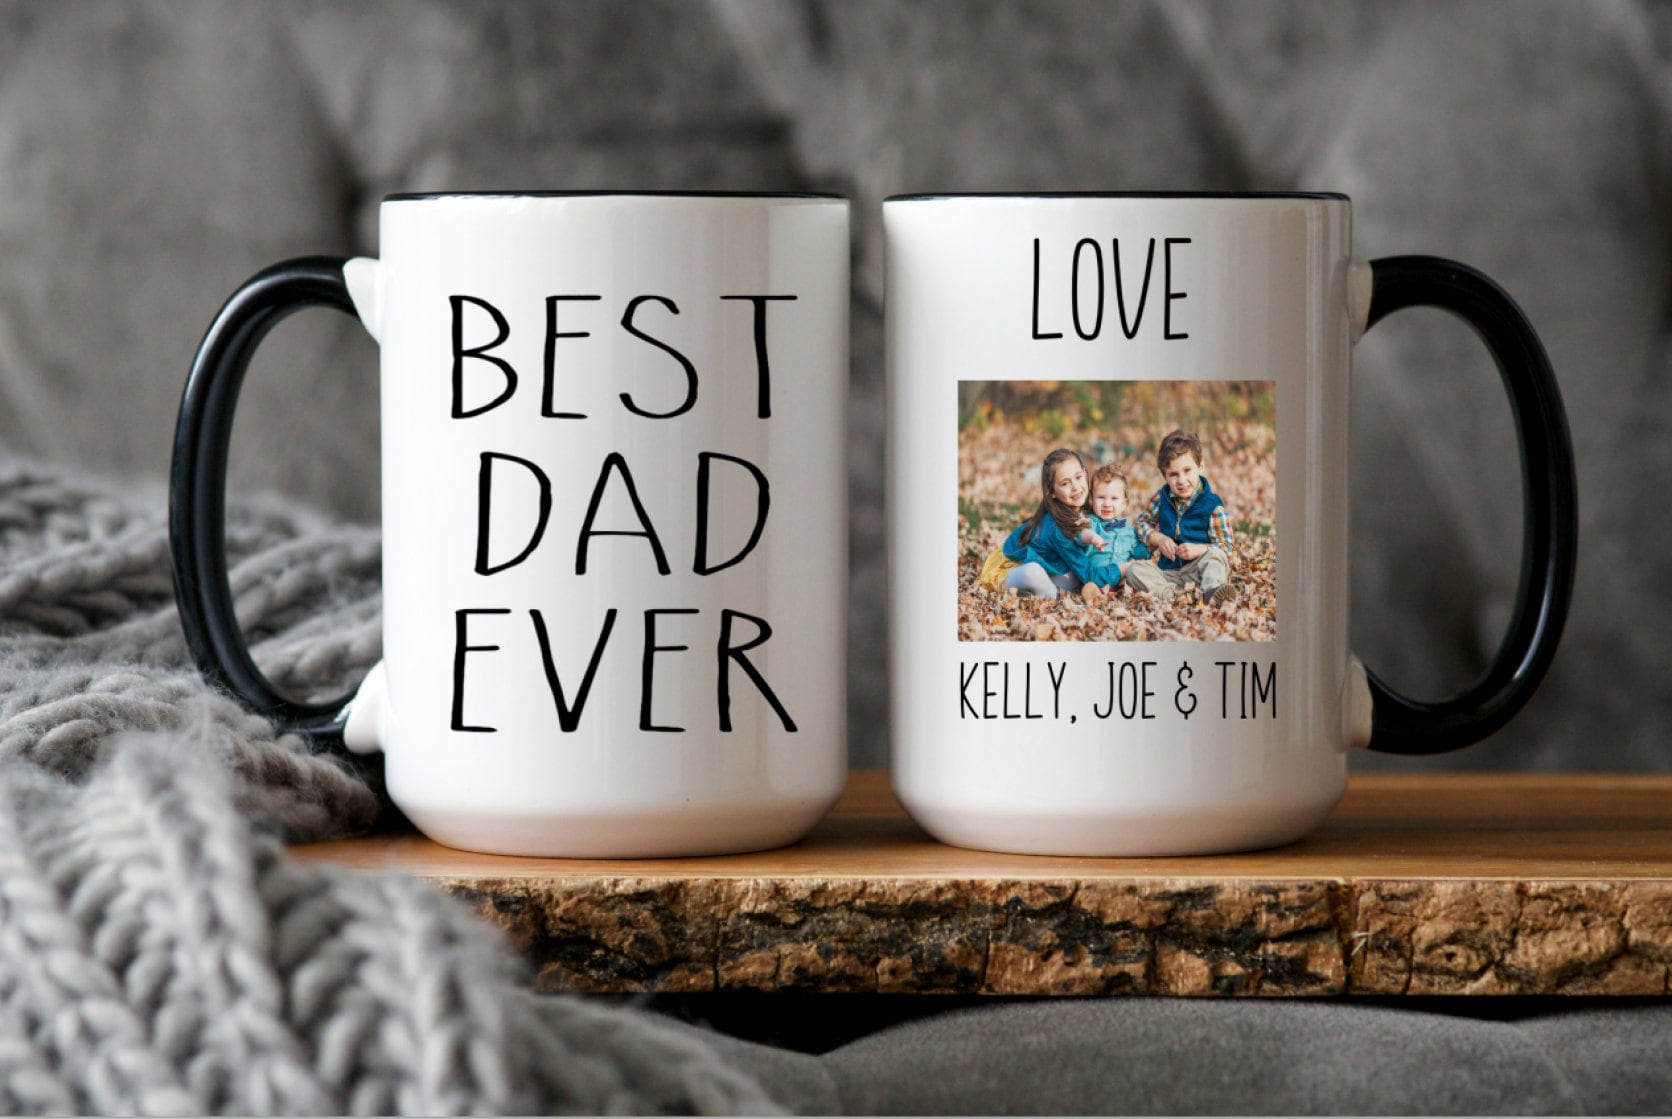 Triple Gifffted Worlds Best Wife Ever Mug For Greatest Women, Appreciation  Gift, Romantic Birthday Gifts Ideas For Her From Husband, Anniversary,  Valentines, Mothers Day Mugs, Christmas, Coffee Cup 